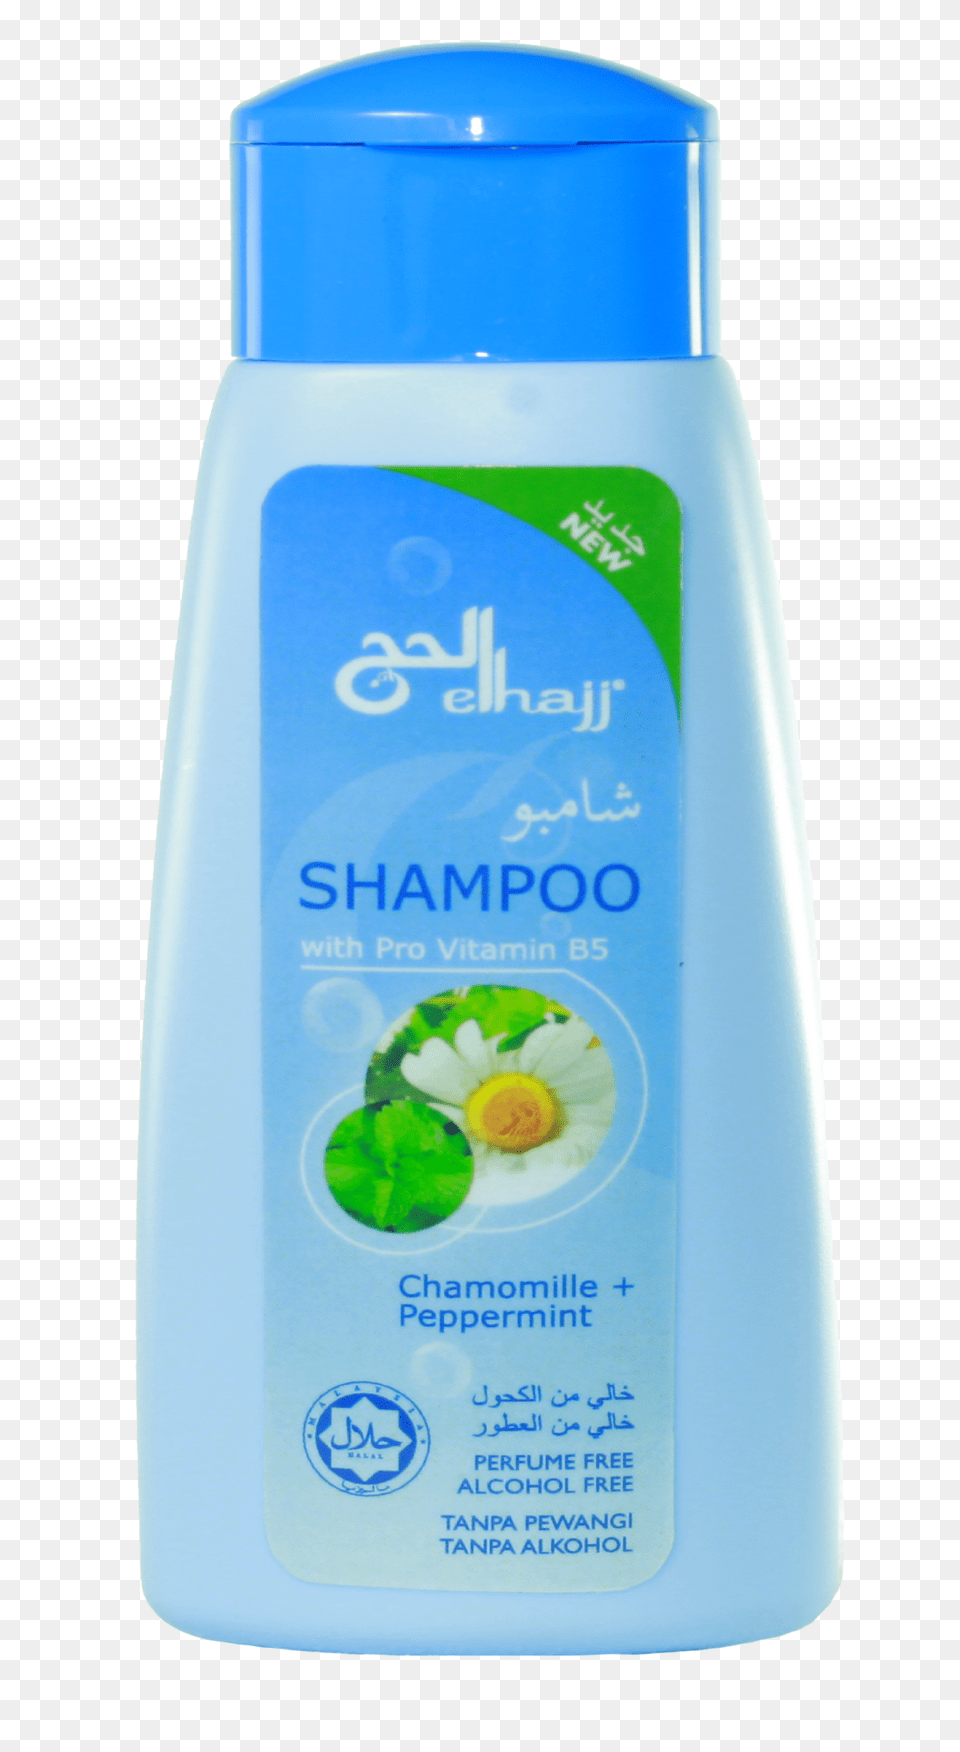 Shampoo, Bottle, Lotion, Herbal, Herbs Png